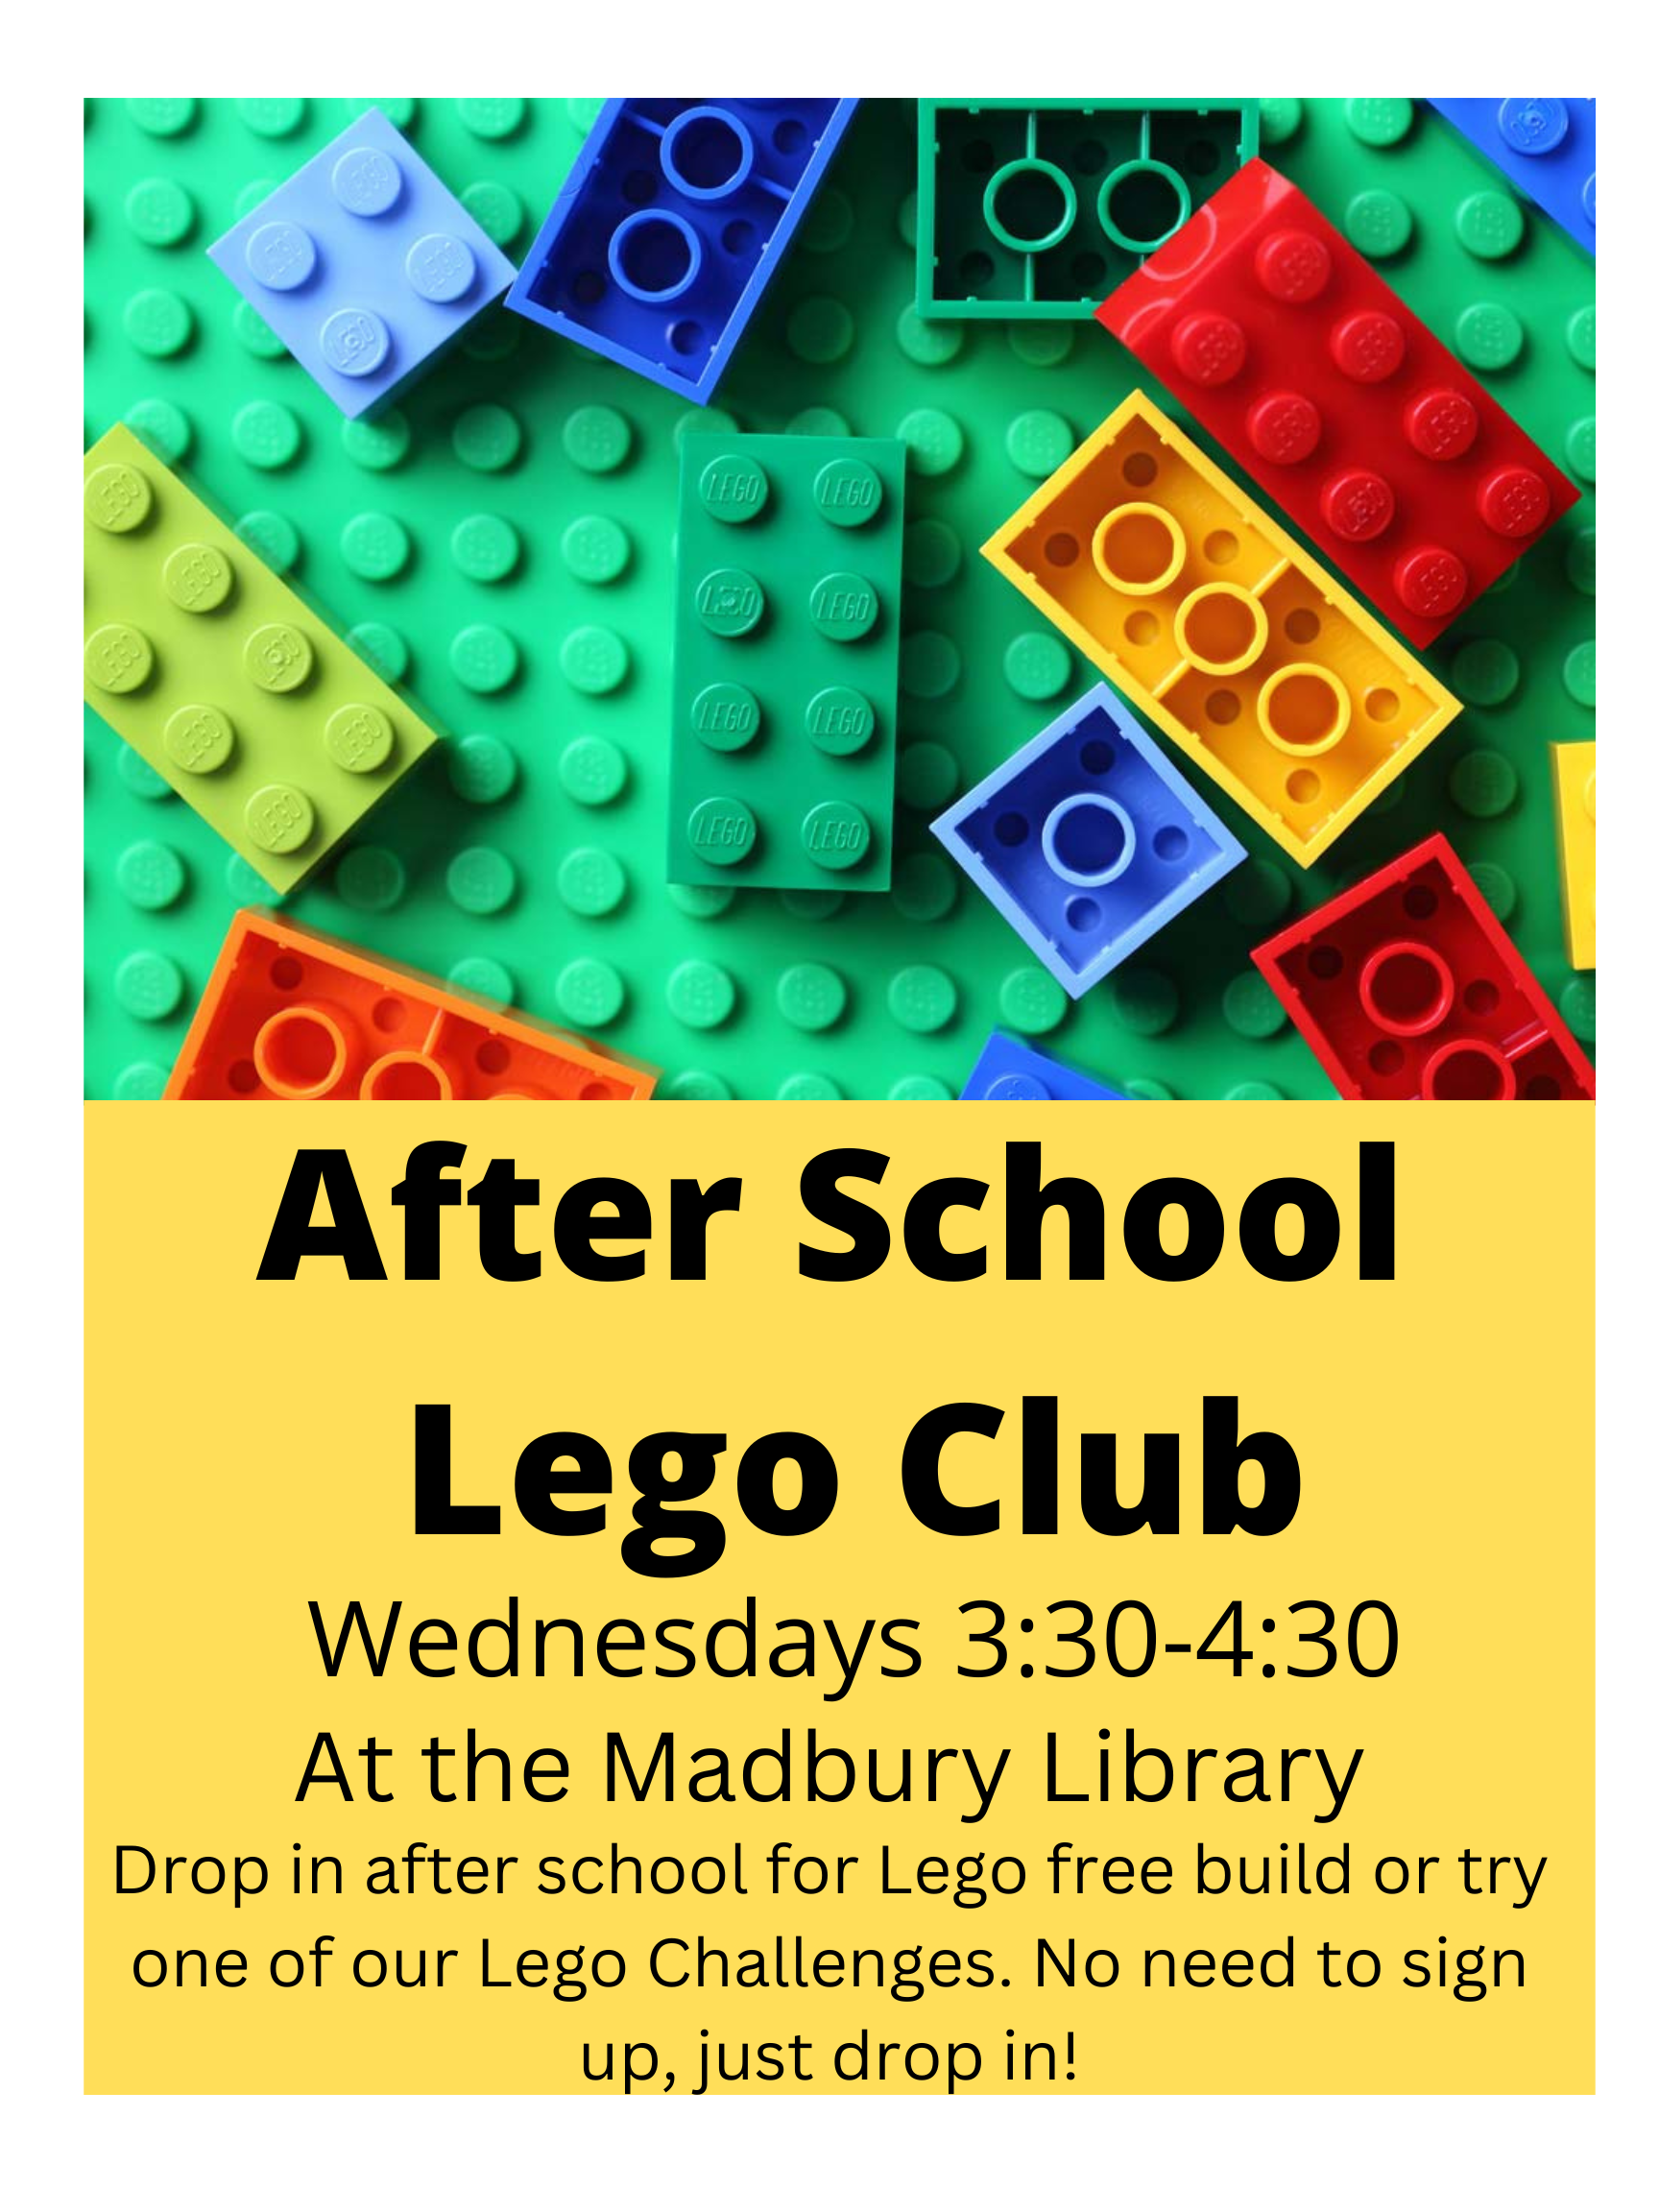 After school lego club every Wednesday from 3:30 to 4:40 come free build or try a lego challenge